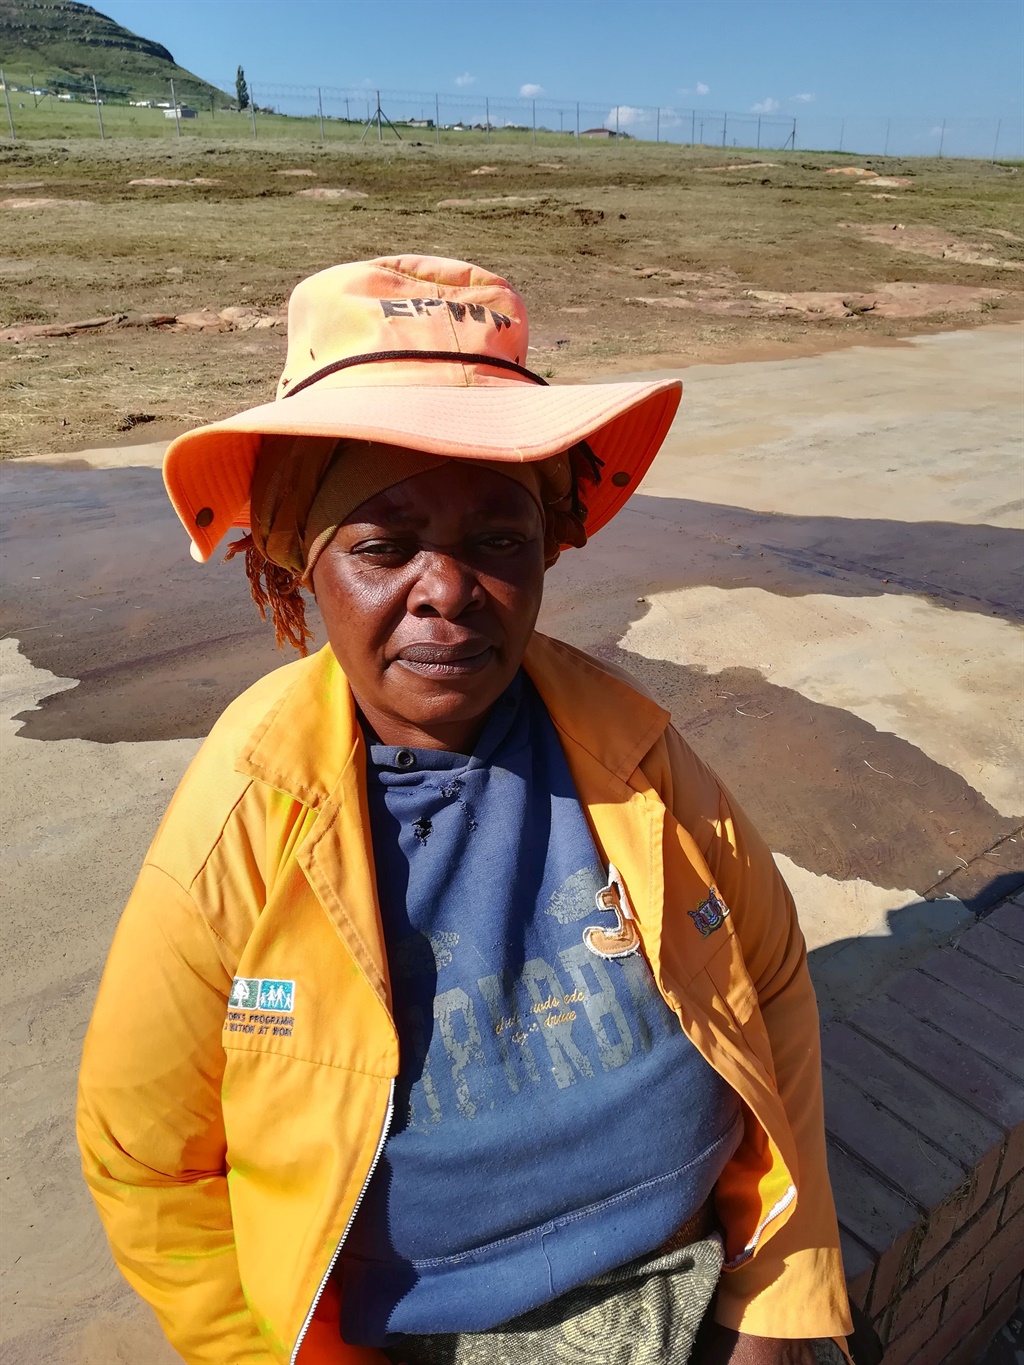 Mampho Gawula is grateful for the income she earns from the Expanded Public Works Programme, but says it is “really too little”. Picture: Lubabalo Ngcukana